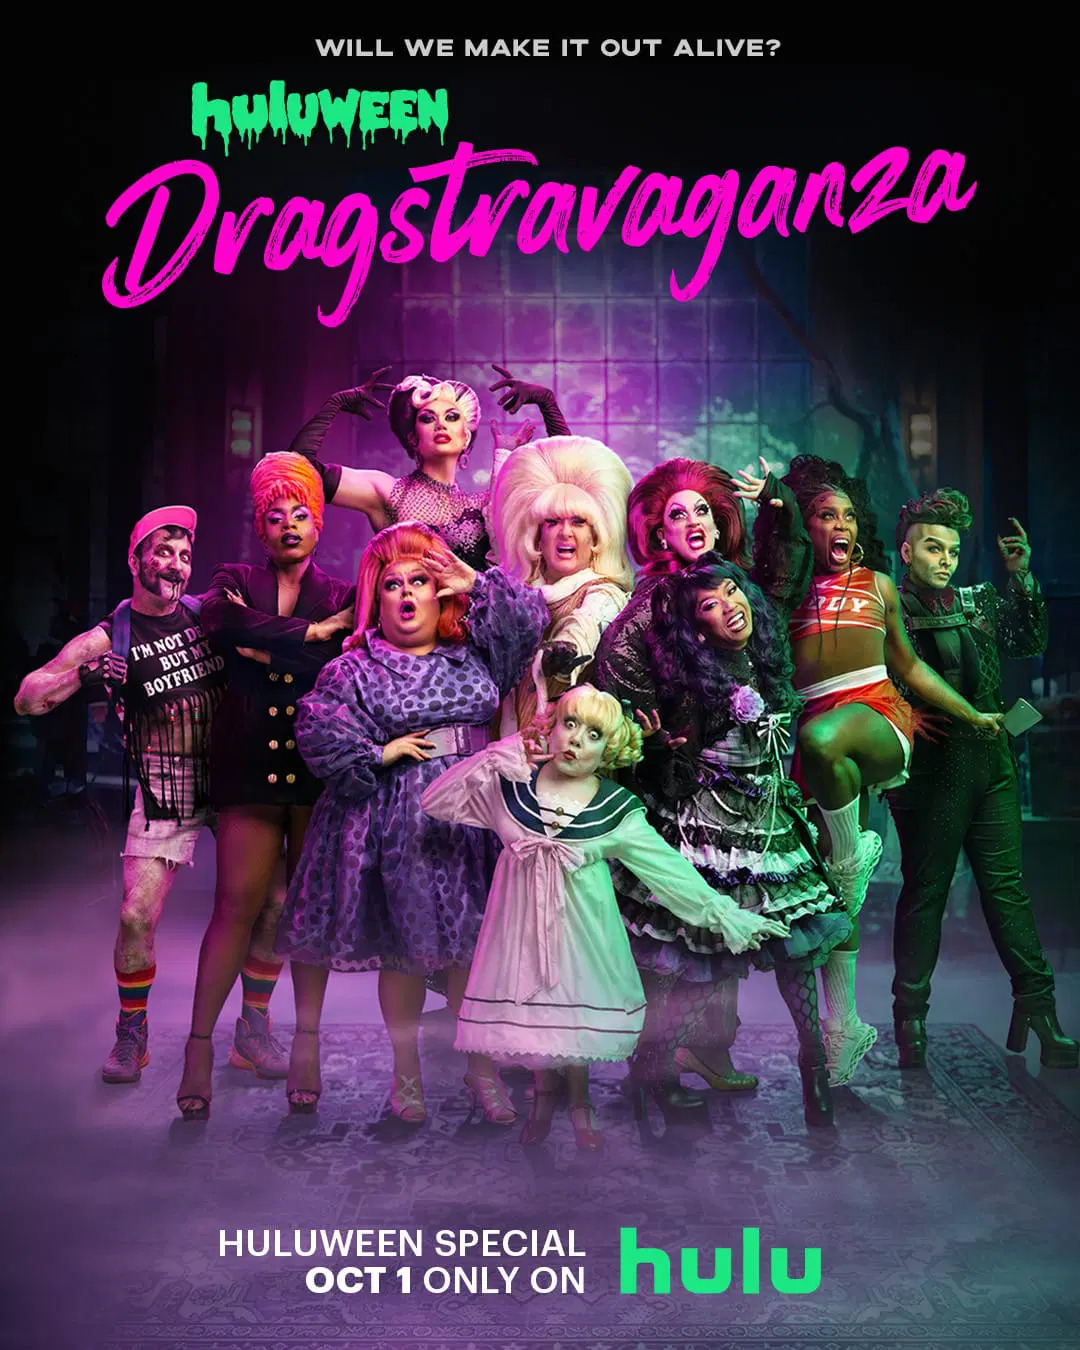 Extra Large TV Poster Image for Huluween Dragstravaganza 